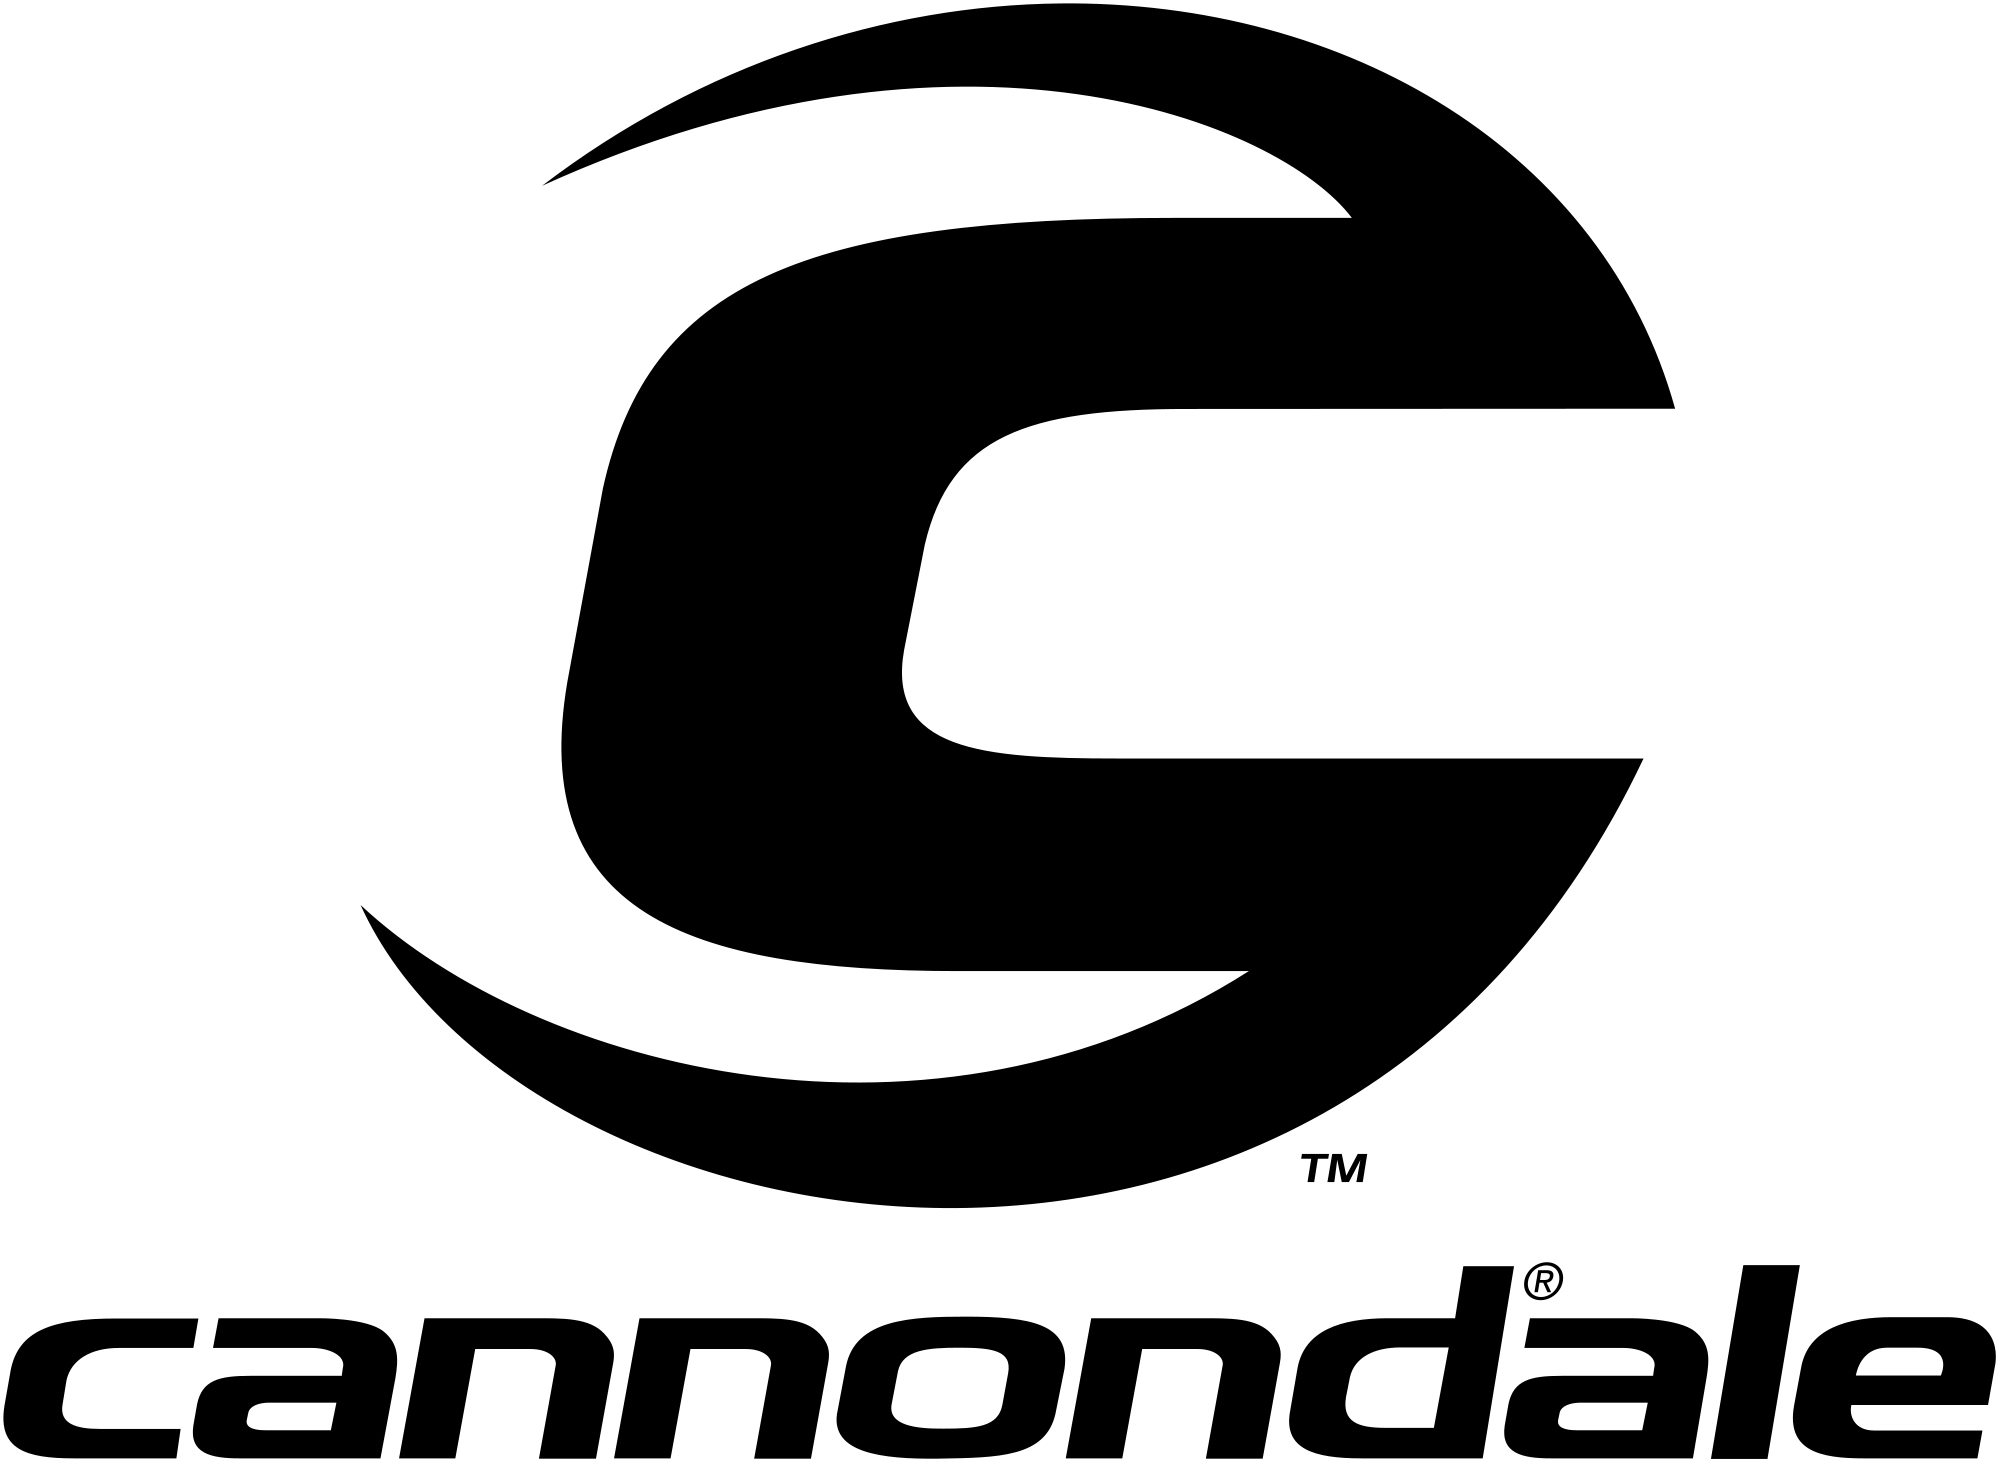 Cannondale logo and link to cannondale page